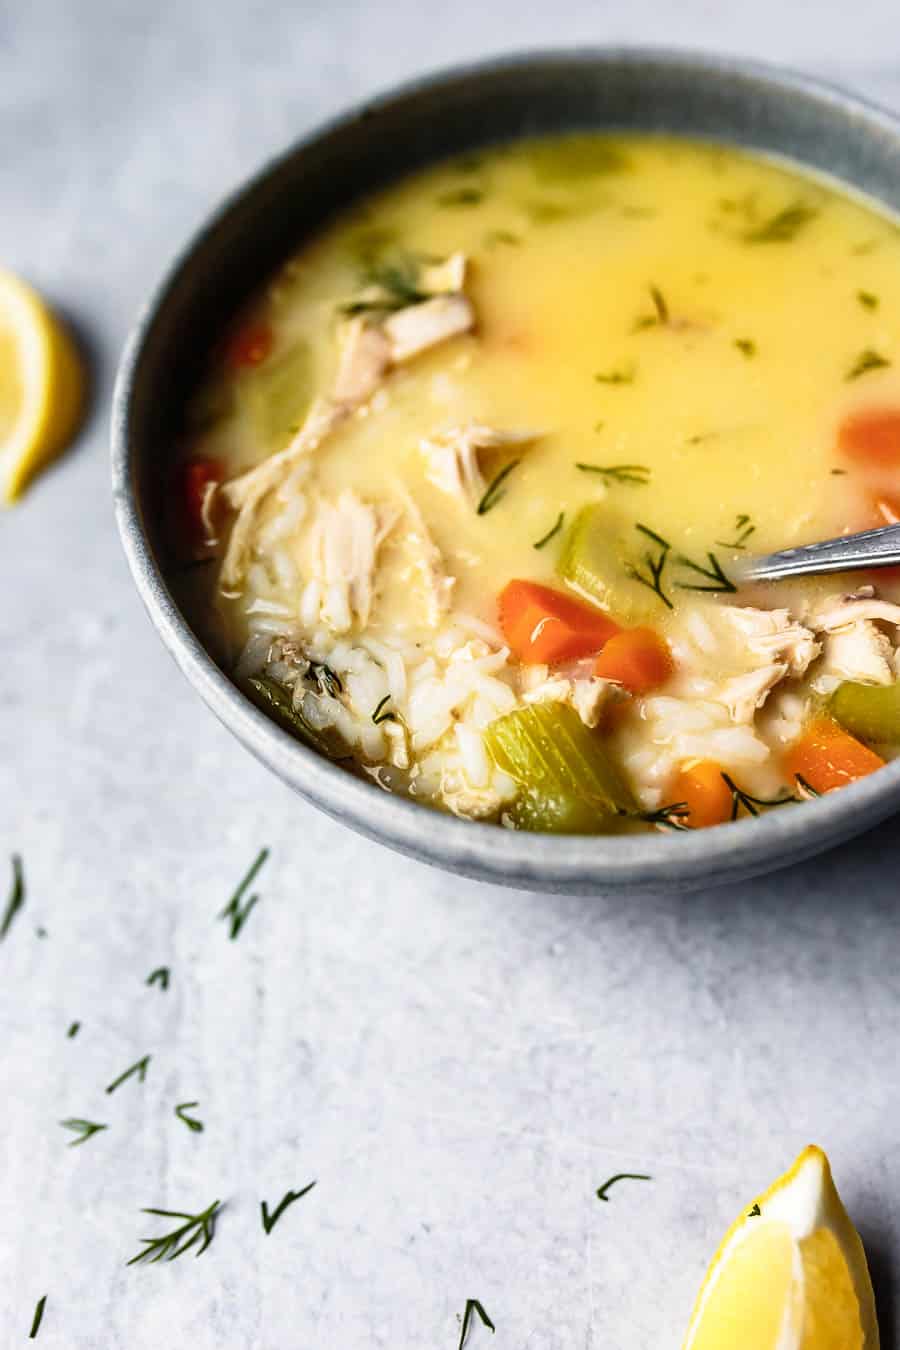 Partial view of this Lemon Chicken Avgolemono Soup. It is a creamy yellow color and has carrots, celery, chicken and rice inside it. It has been garnished with dill and served in a grey bowl. It is place on top of a grey counter where there is leftover lemon wedges laying.